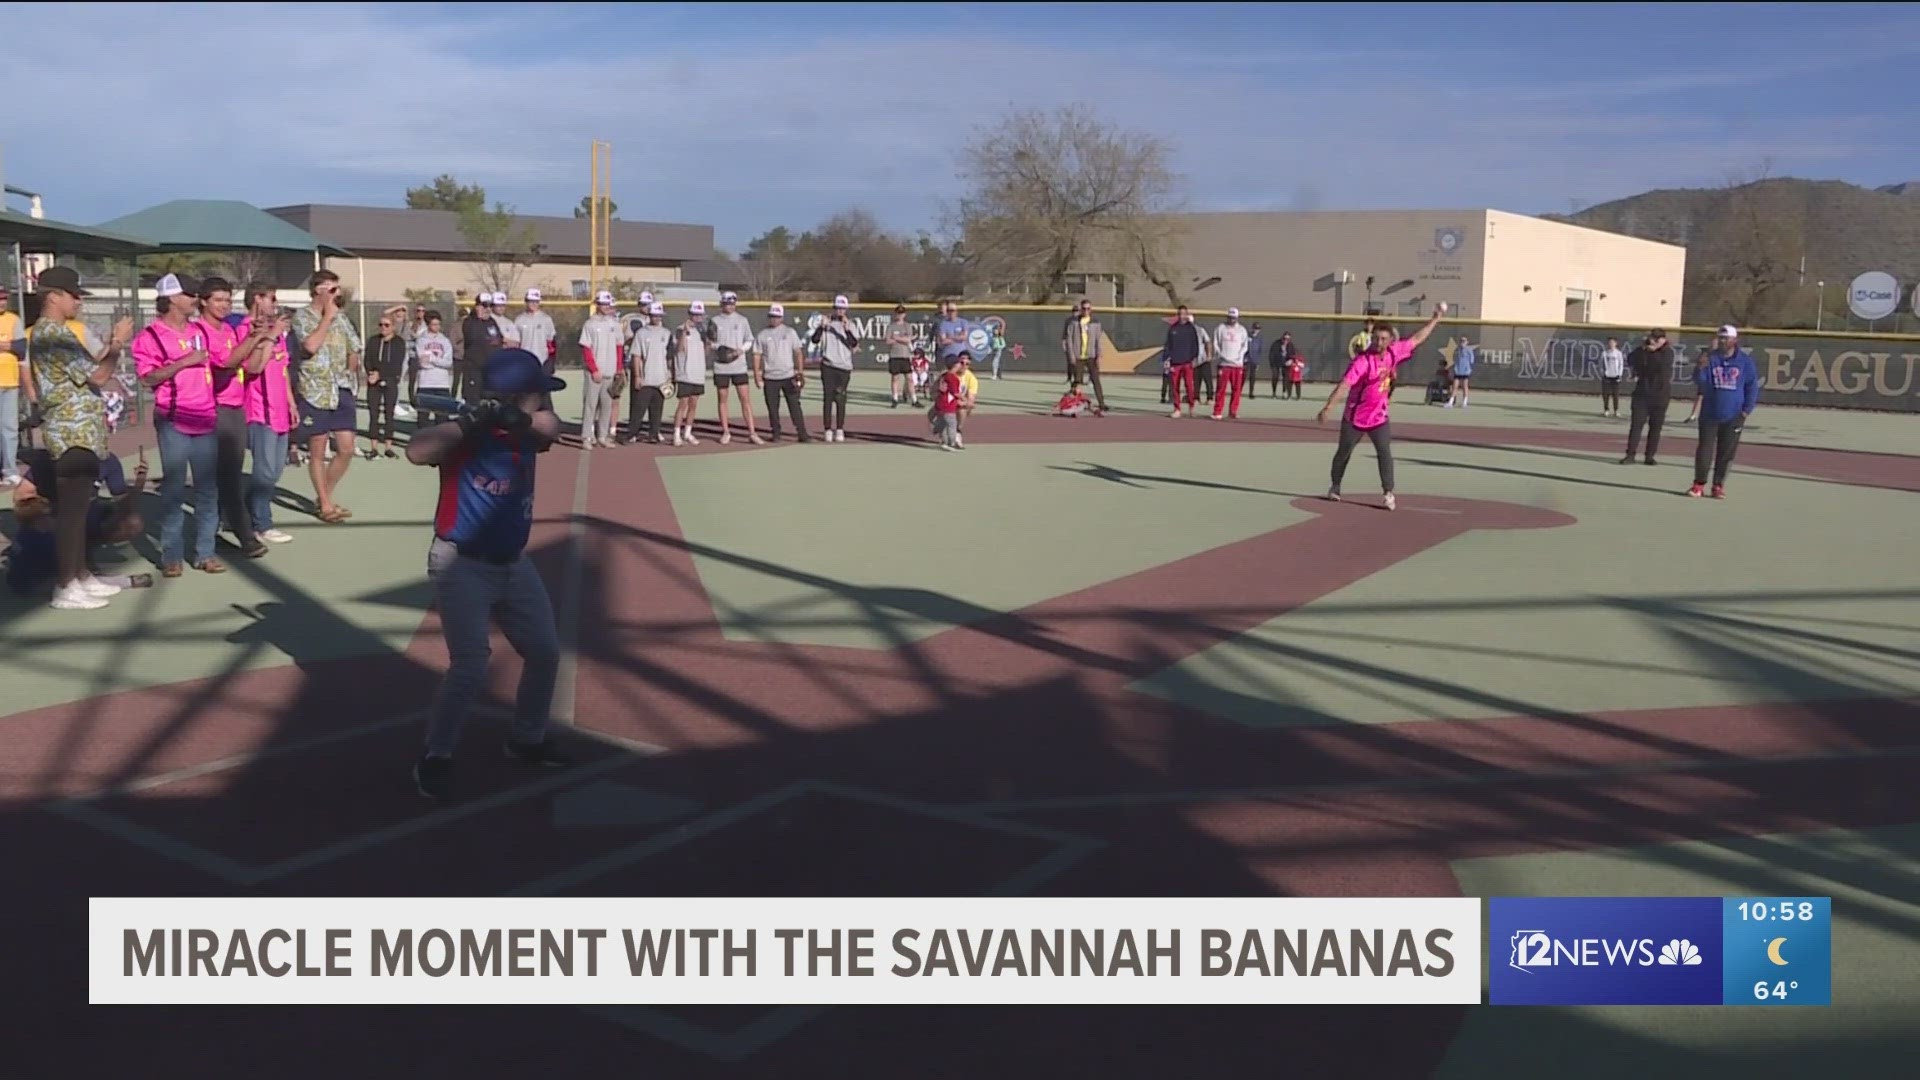 The Savannah Bananas took a trip to the Miracle League of Arizona during their stop in the Valley and a very special moment took place. You can watch it above.